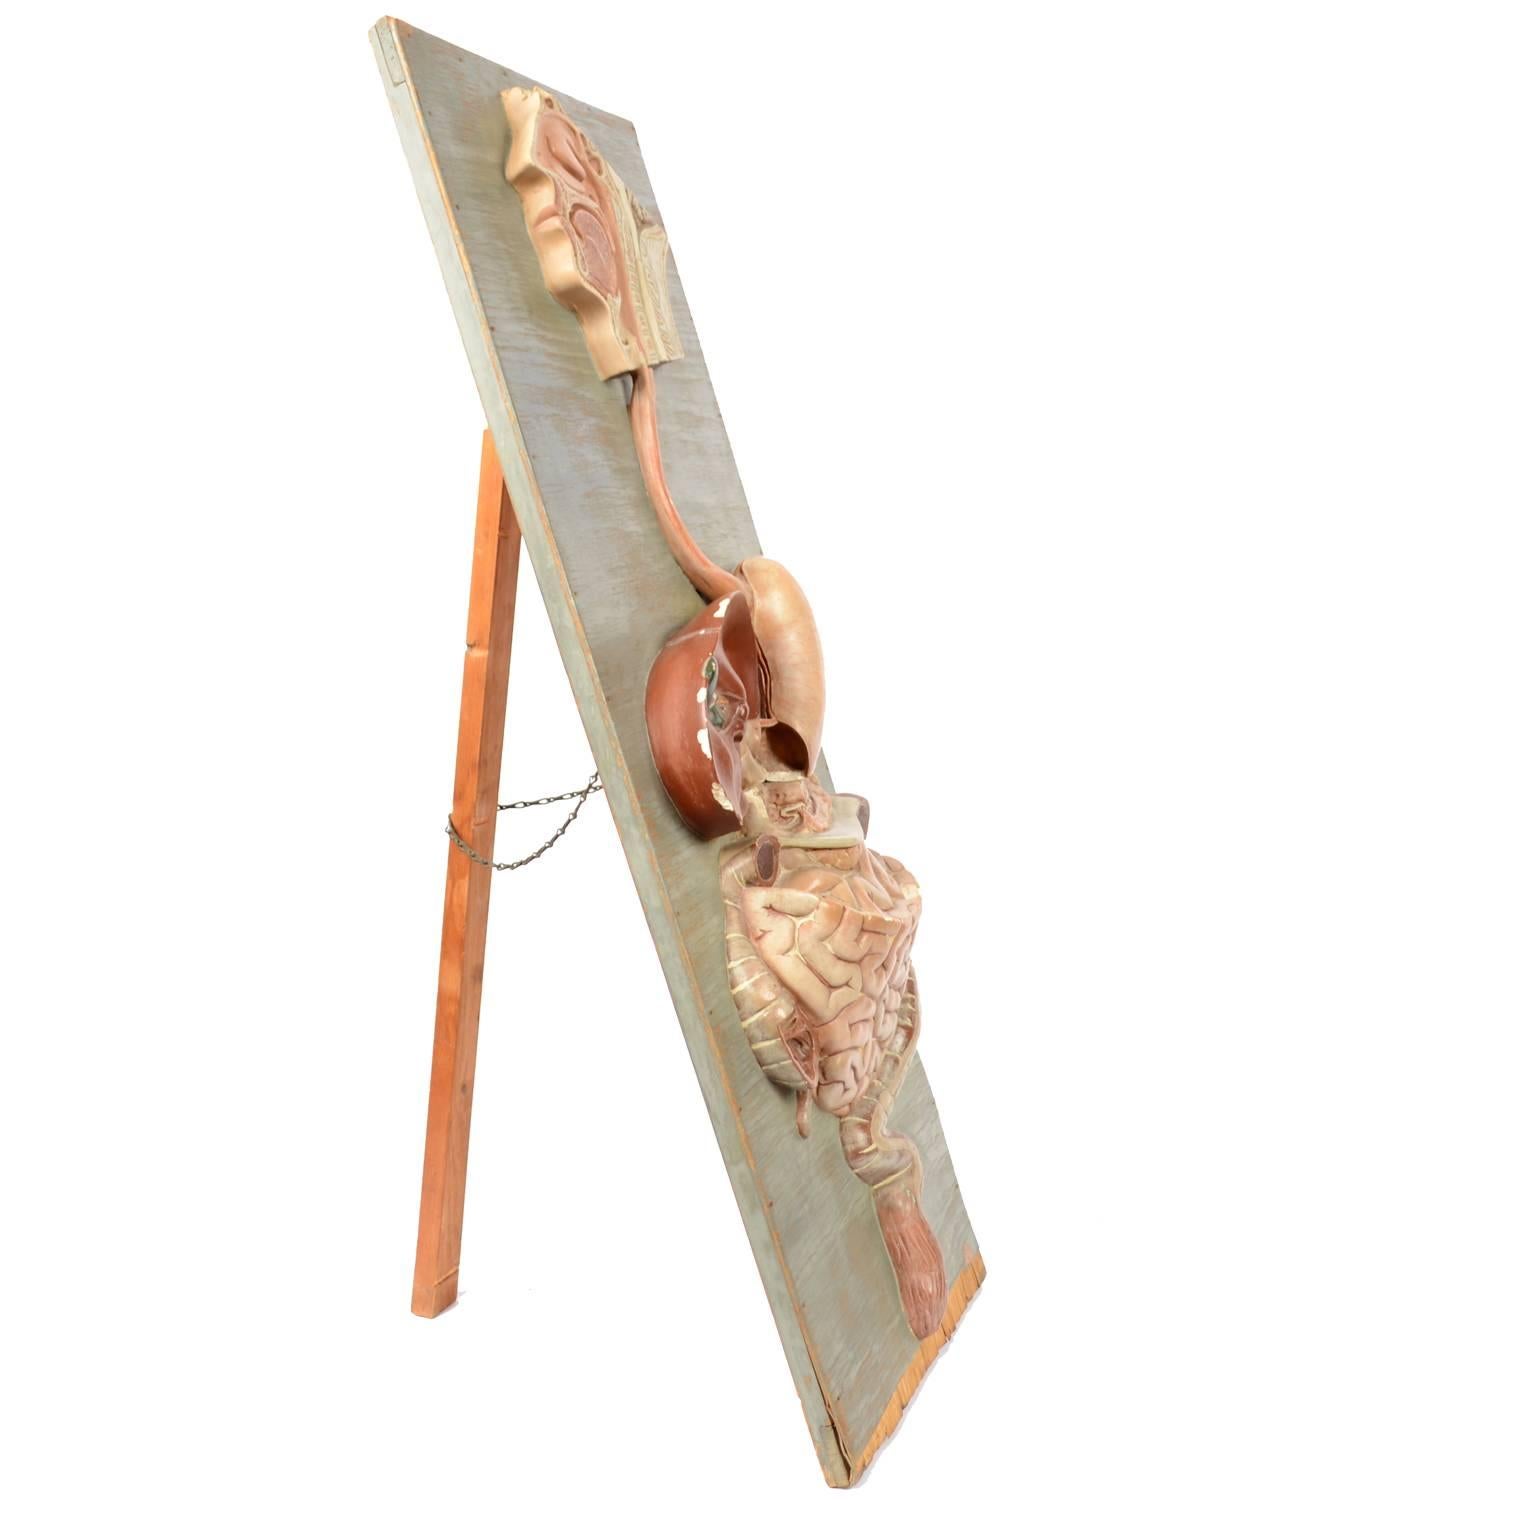 Educational Biology Model Made in Germany in the Late 19th Century 2